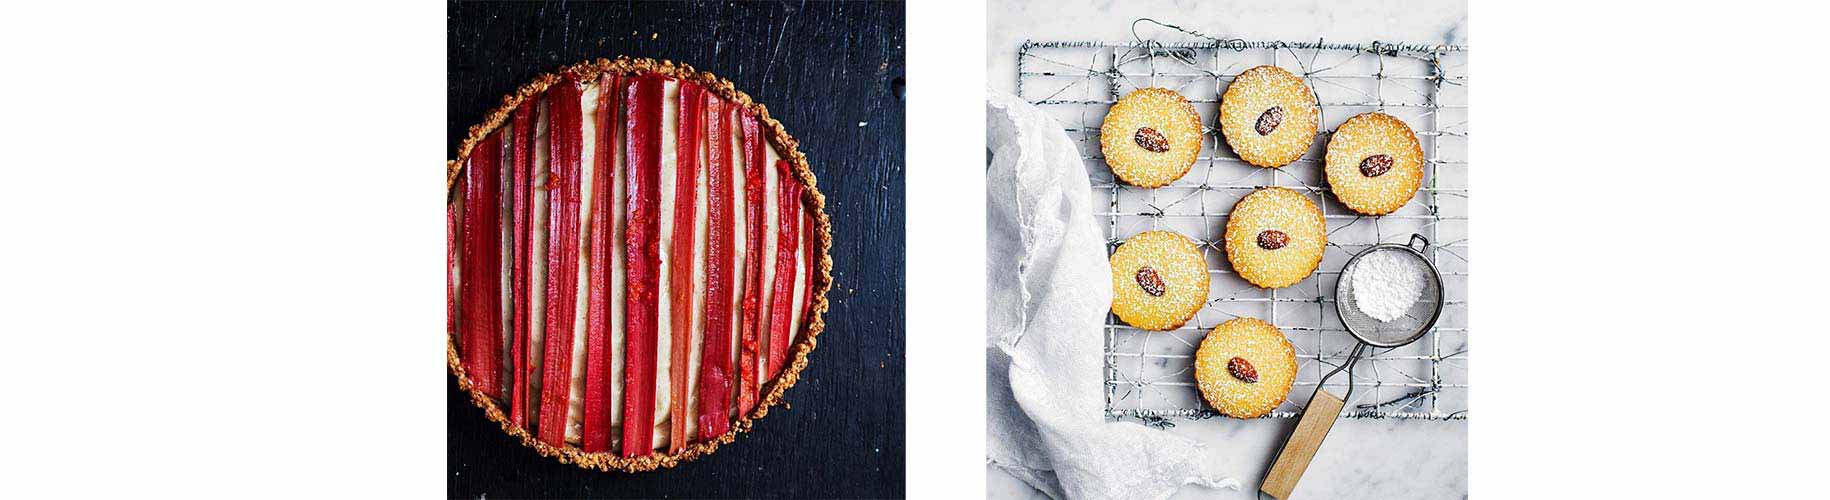 pie and tarts